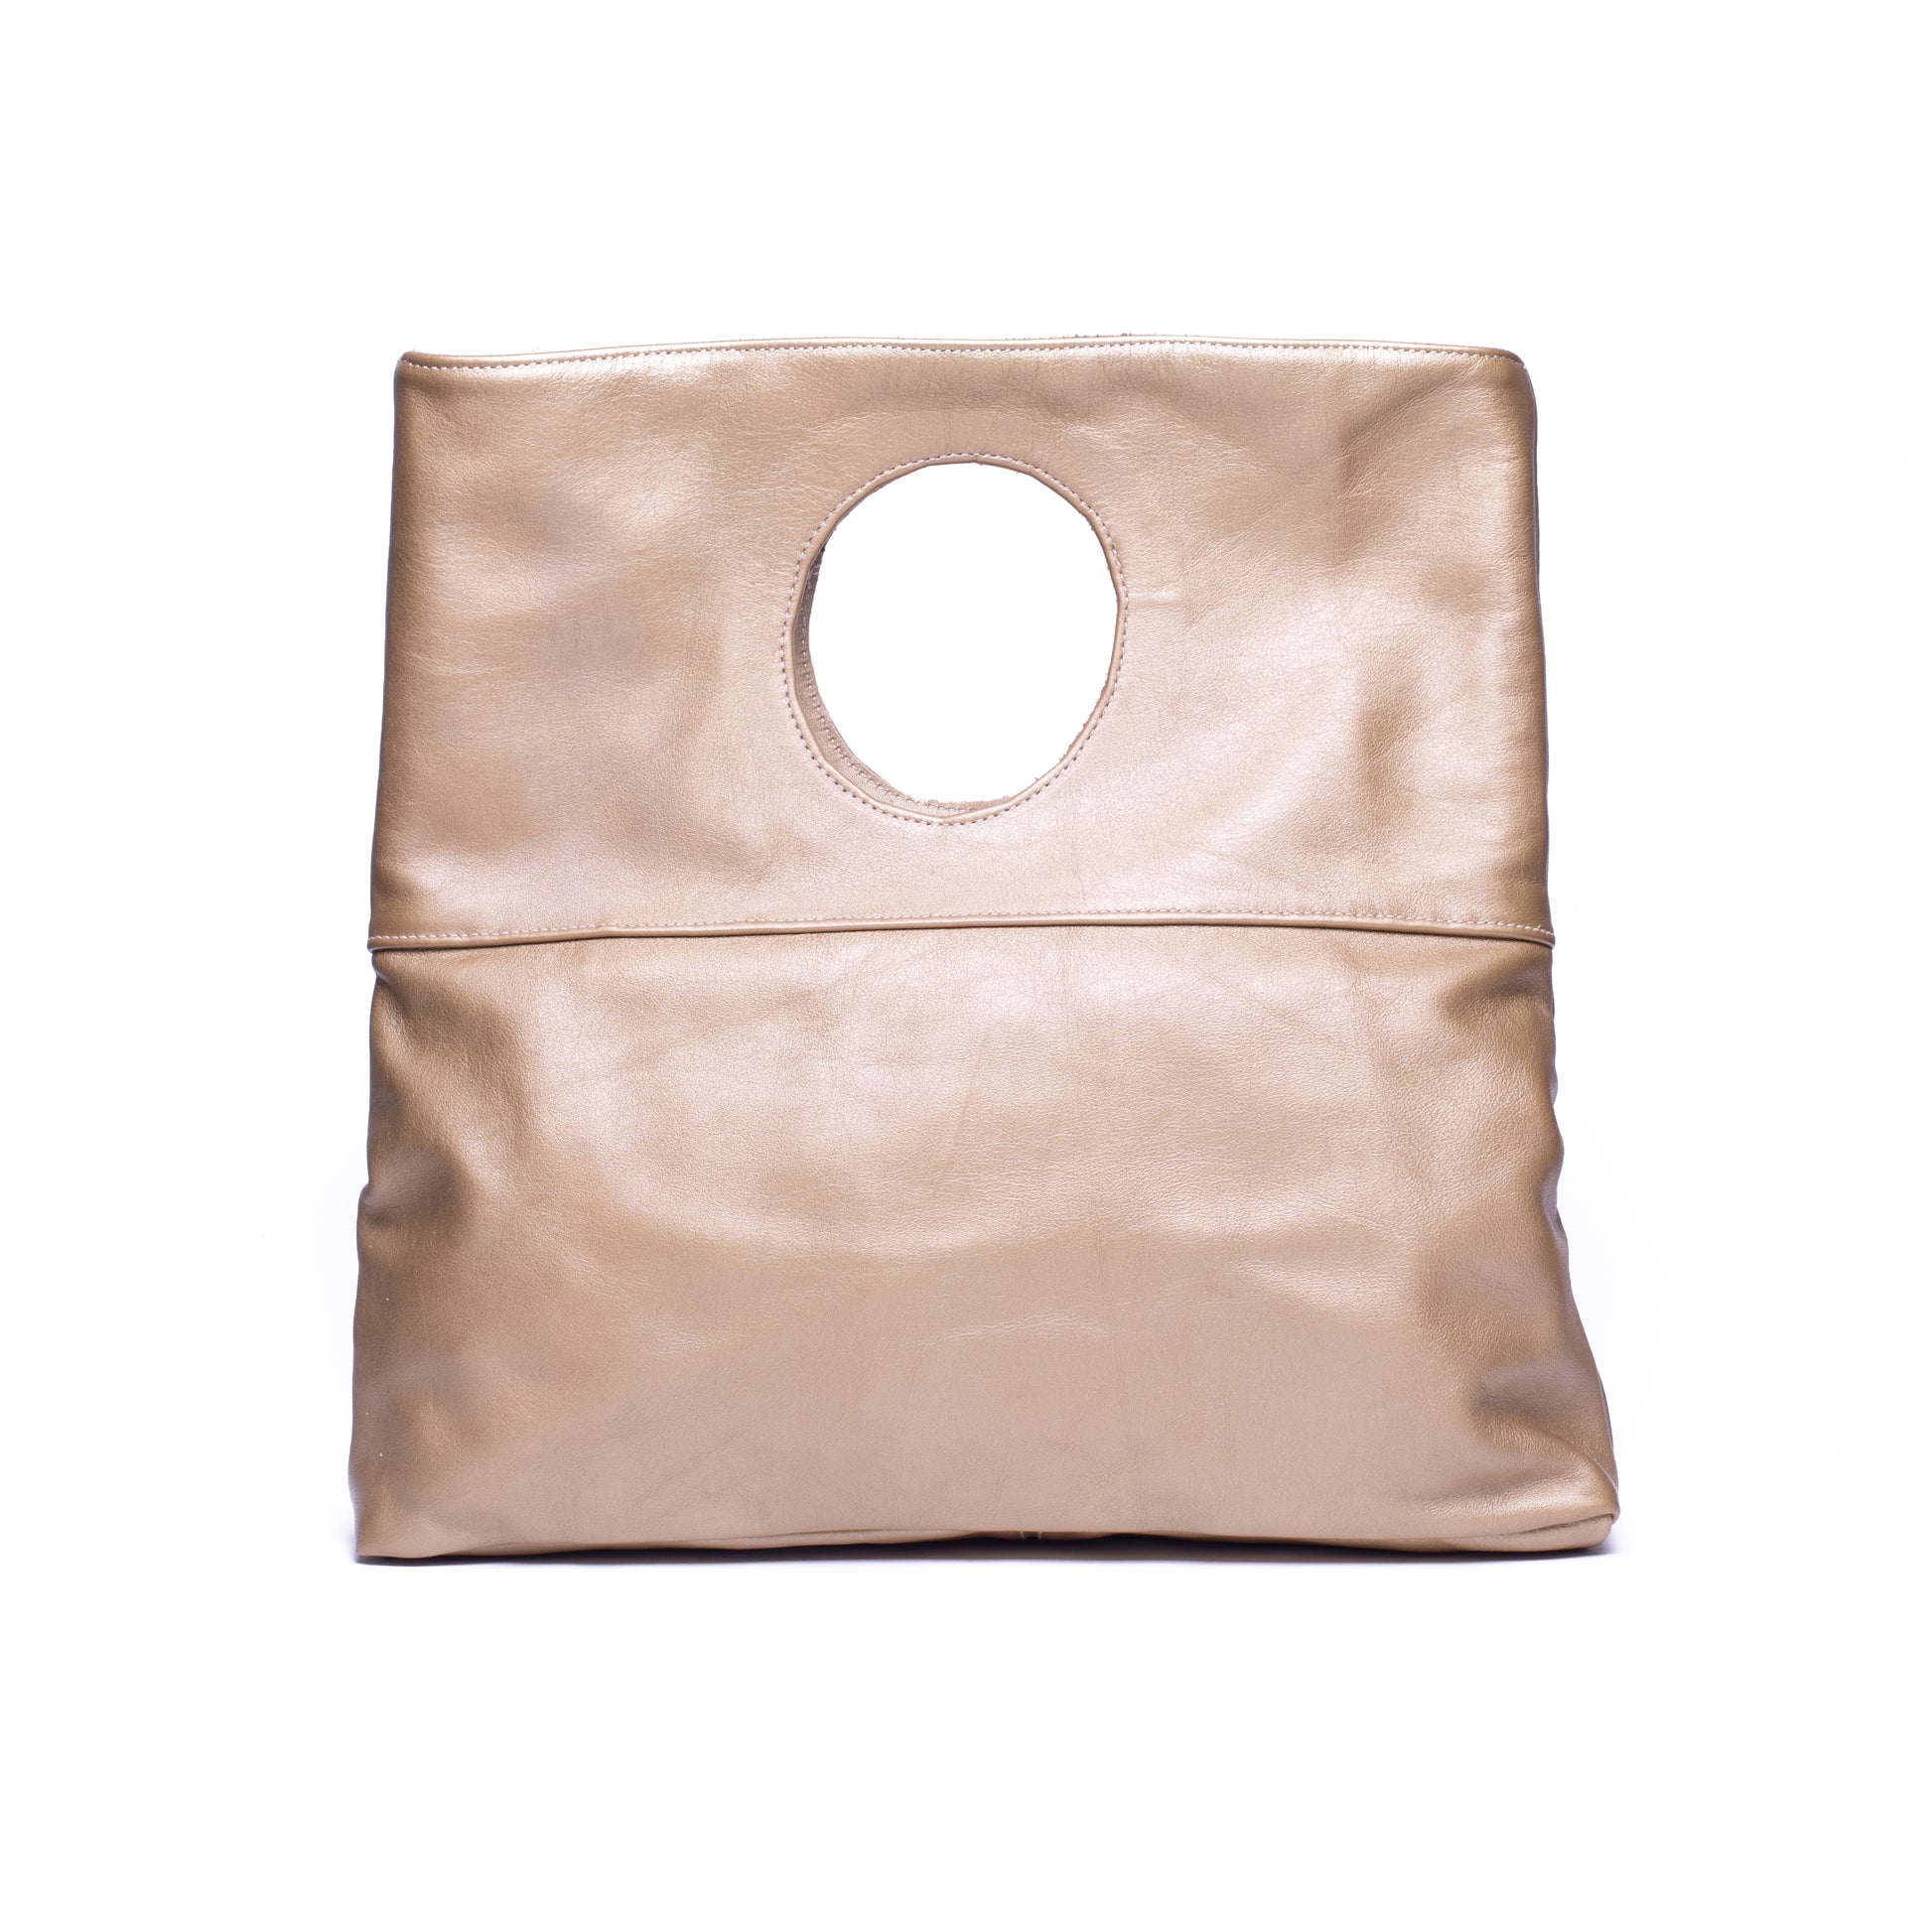 gld ags for women